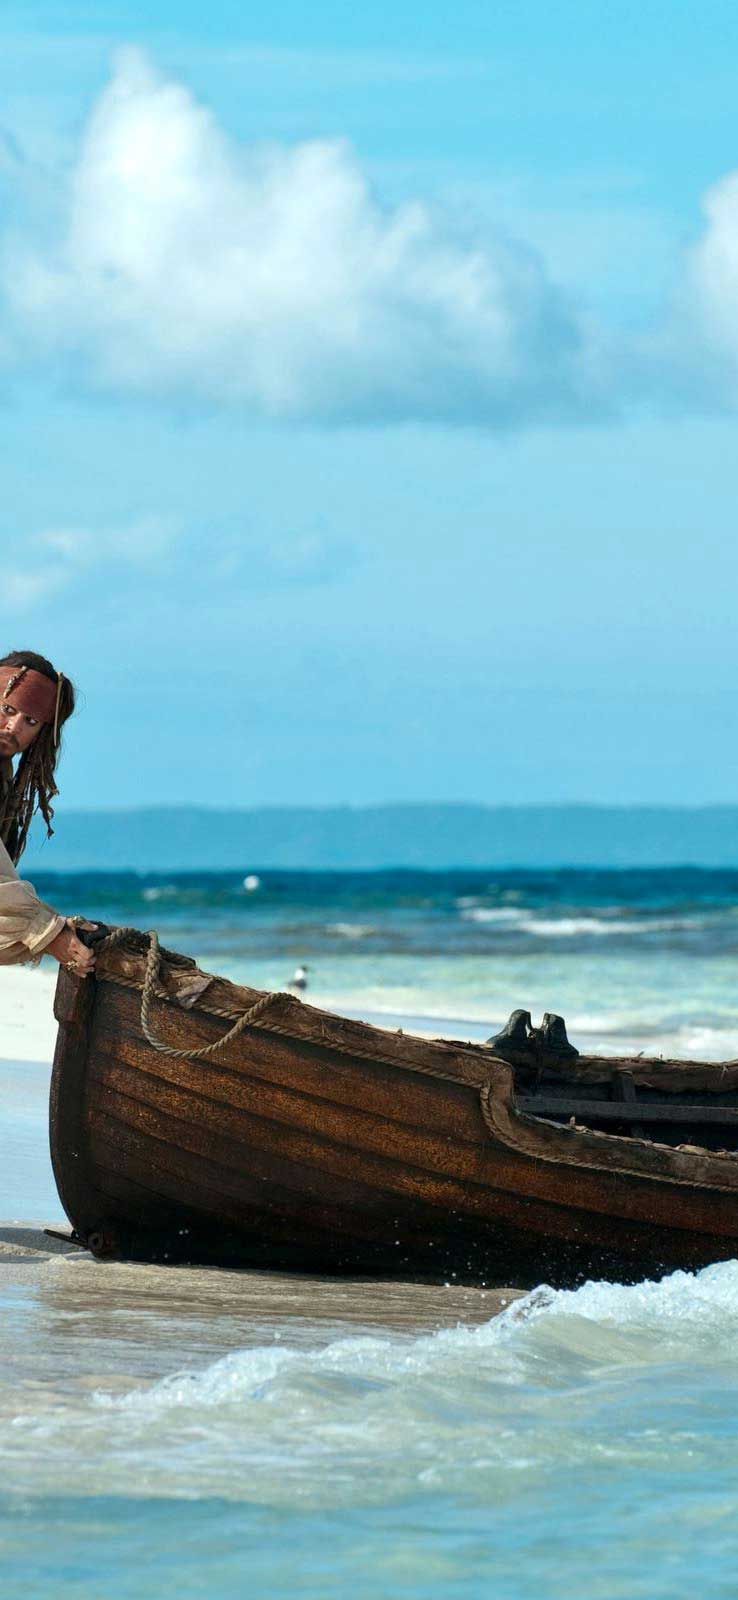 Jack Sparrow and his boat on the beach - Pirate